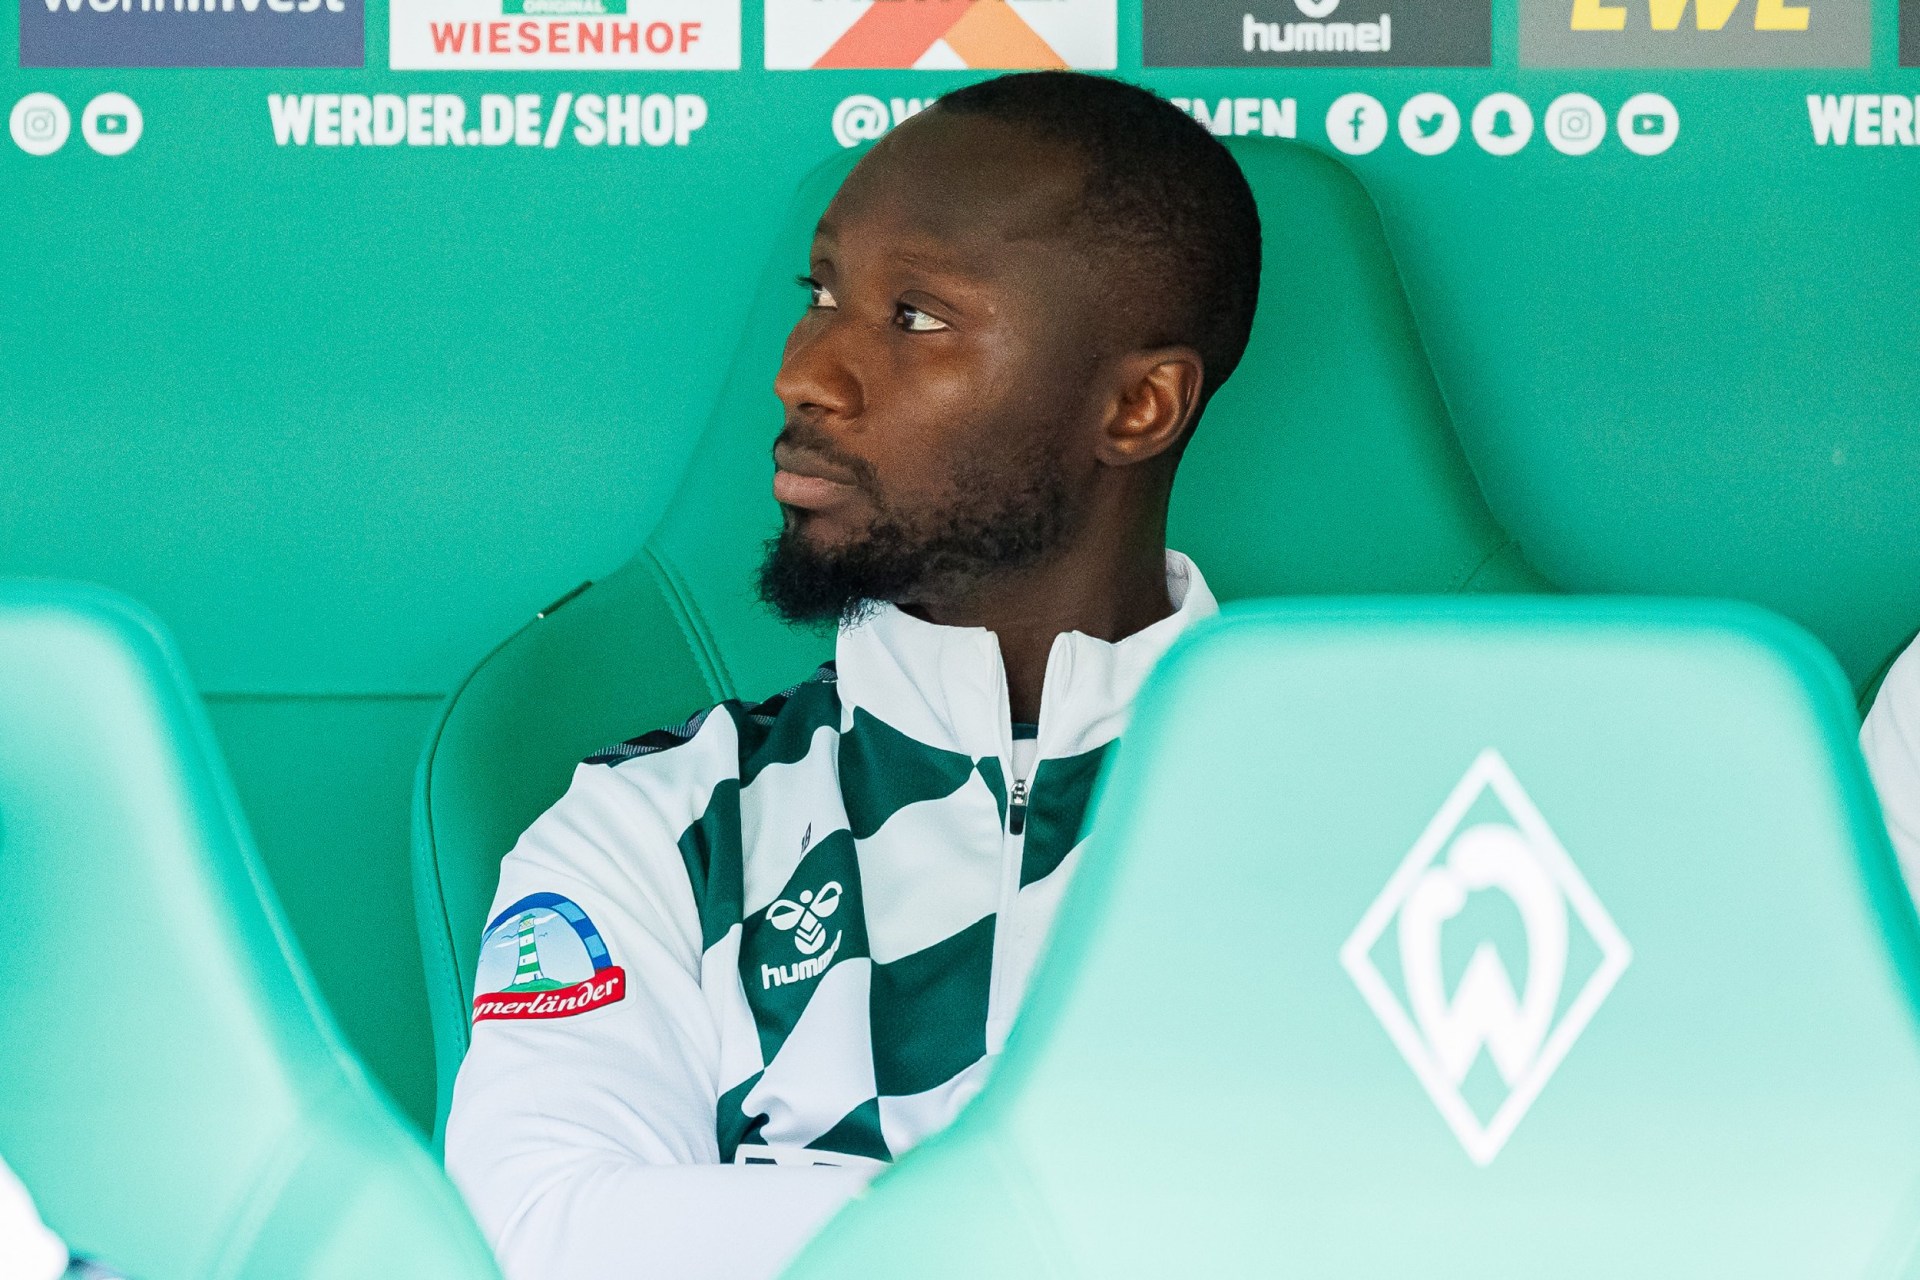 ex-liverpool star naby keita suspended and given 'substantial fine' by werder bremen